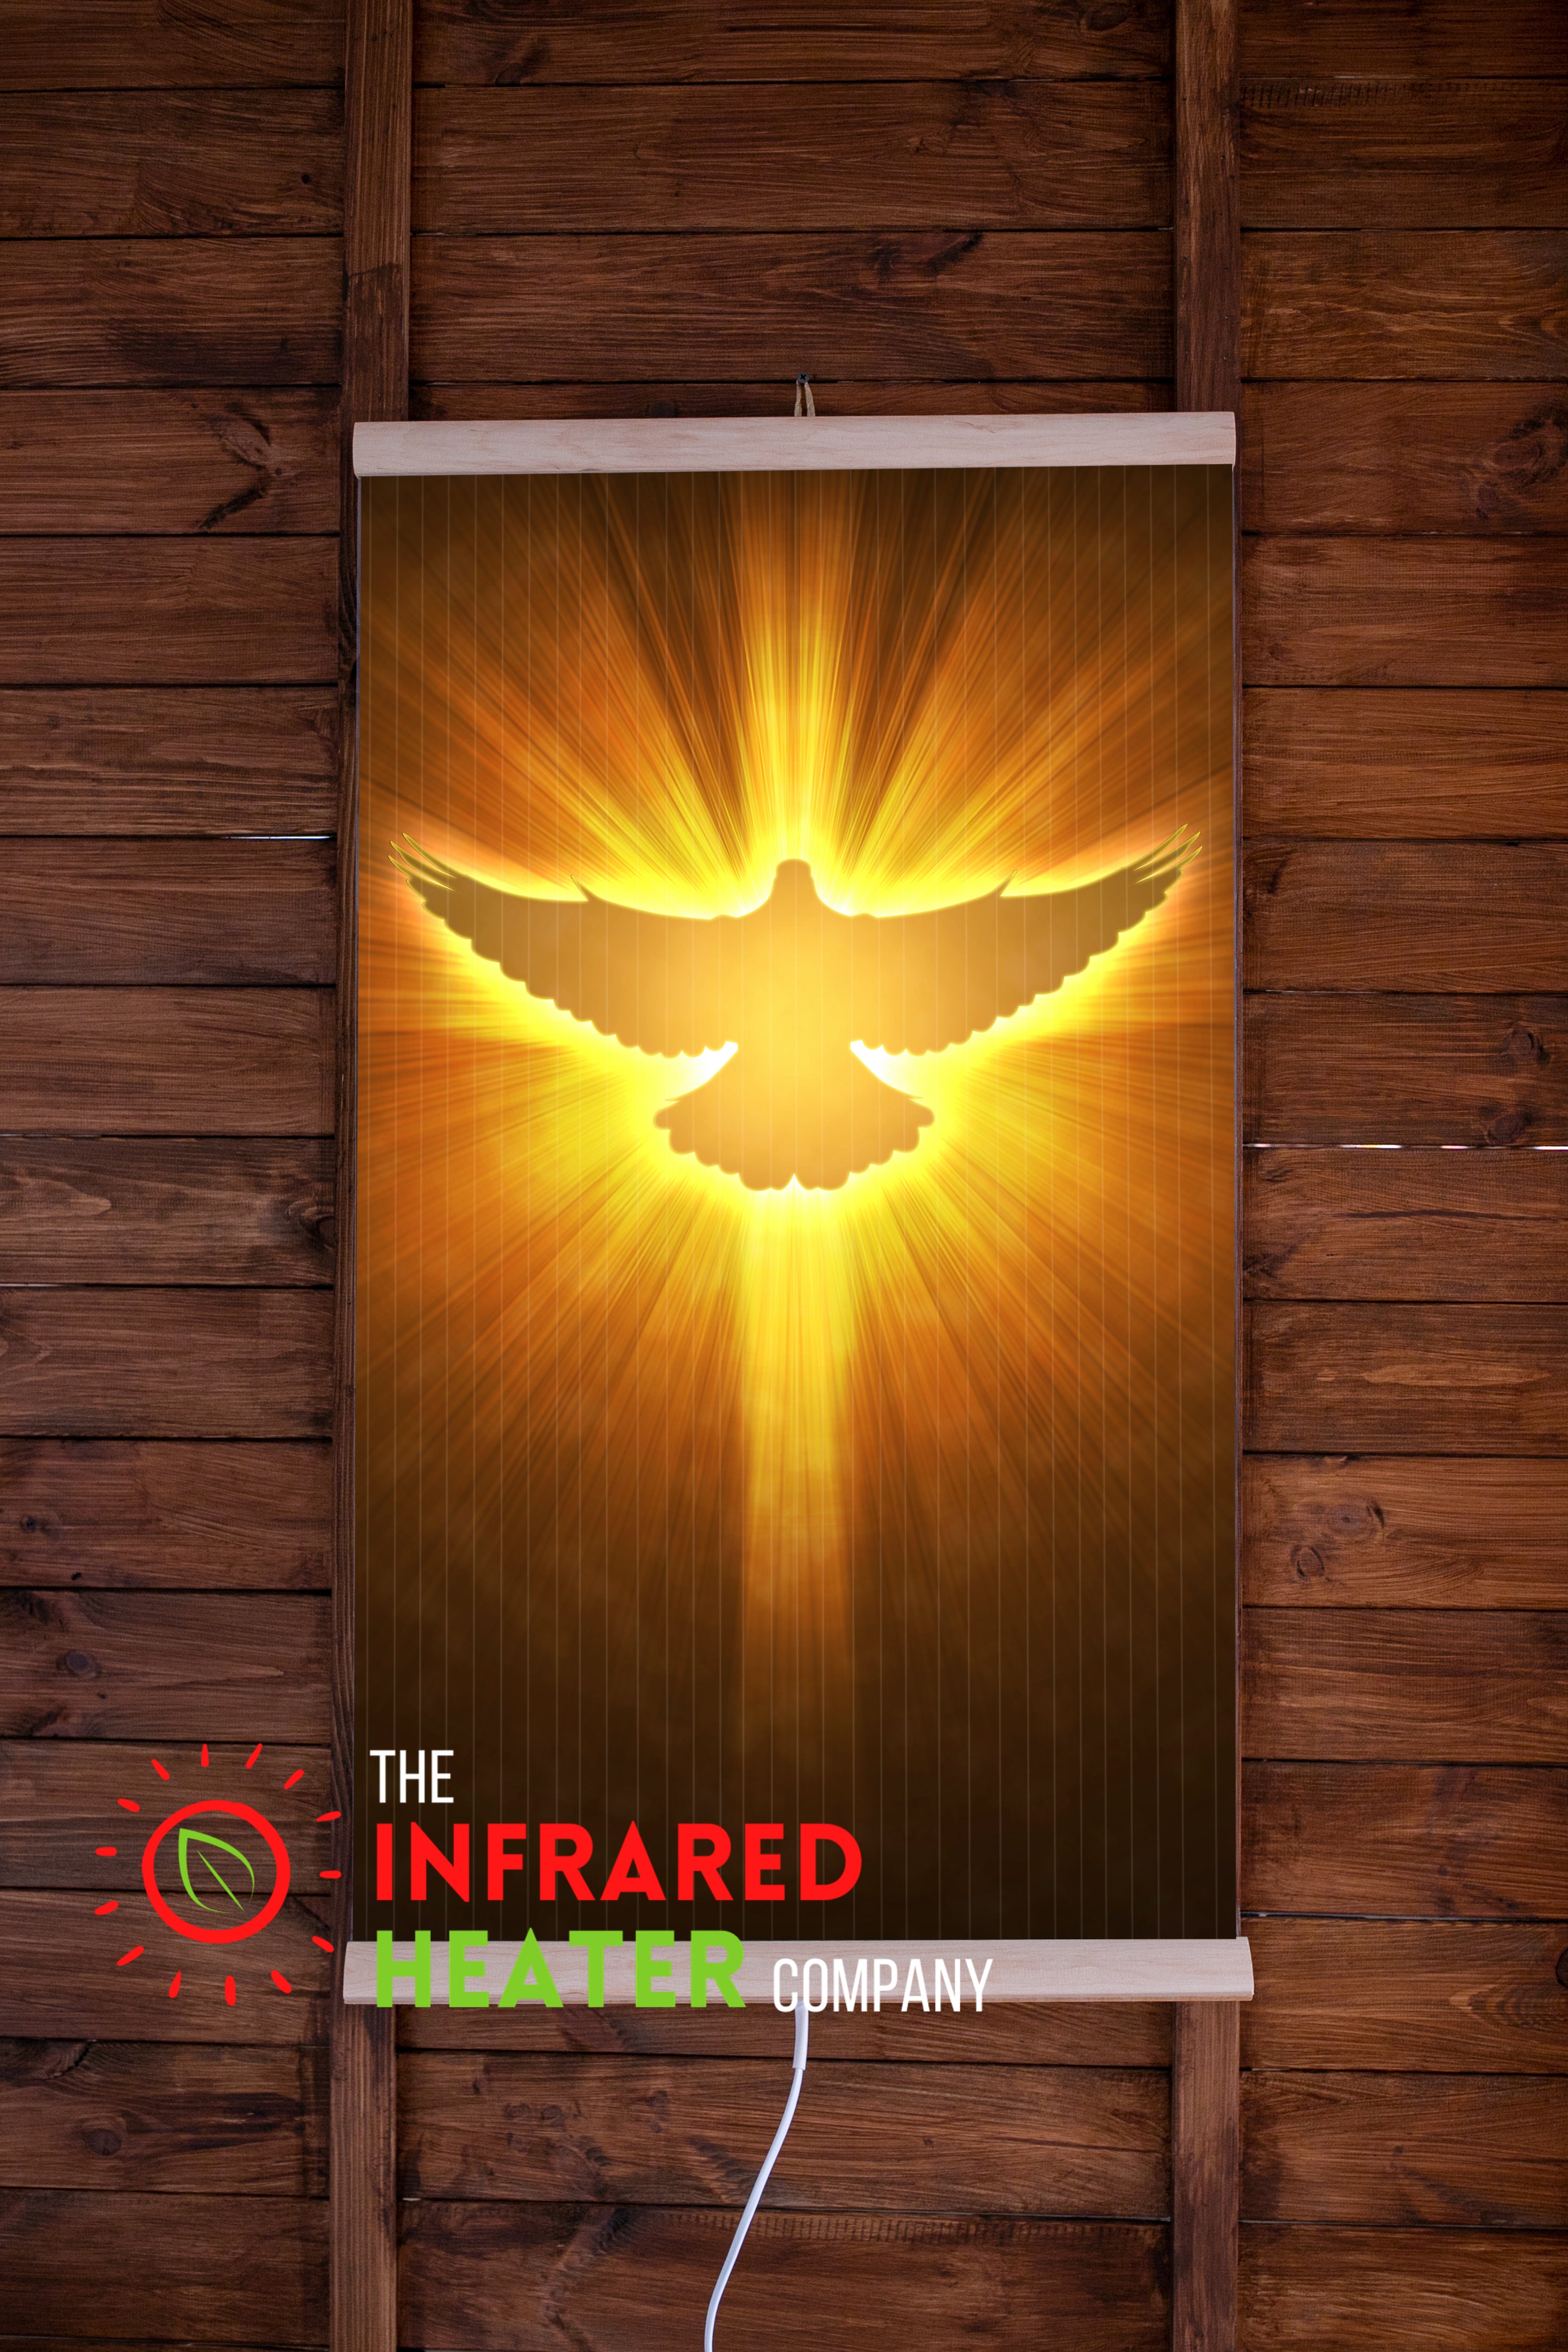 Infrared Wall mounted  Picture Heater. Far Infrared Heating Panel 420W "Holy Spirit"